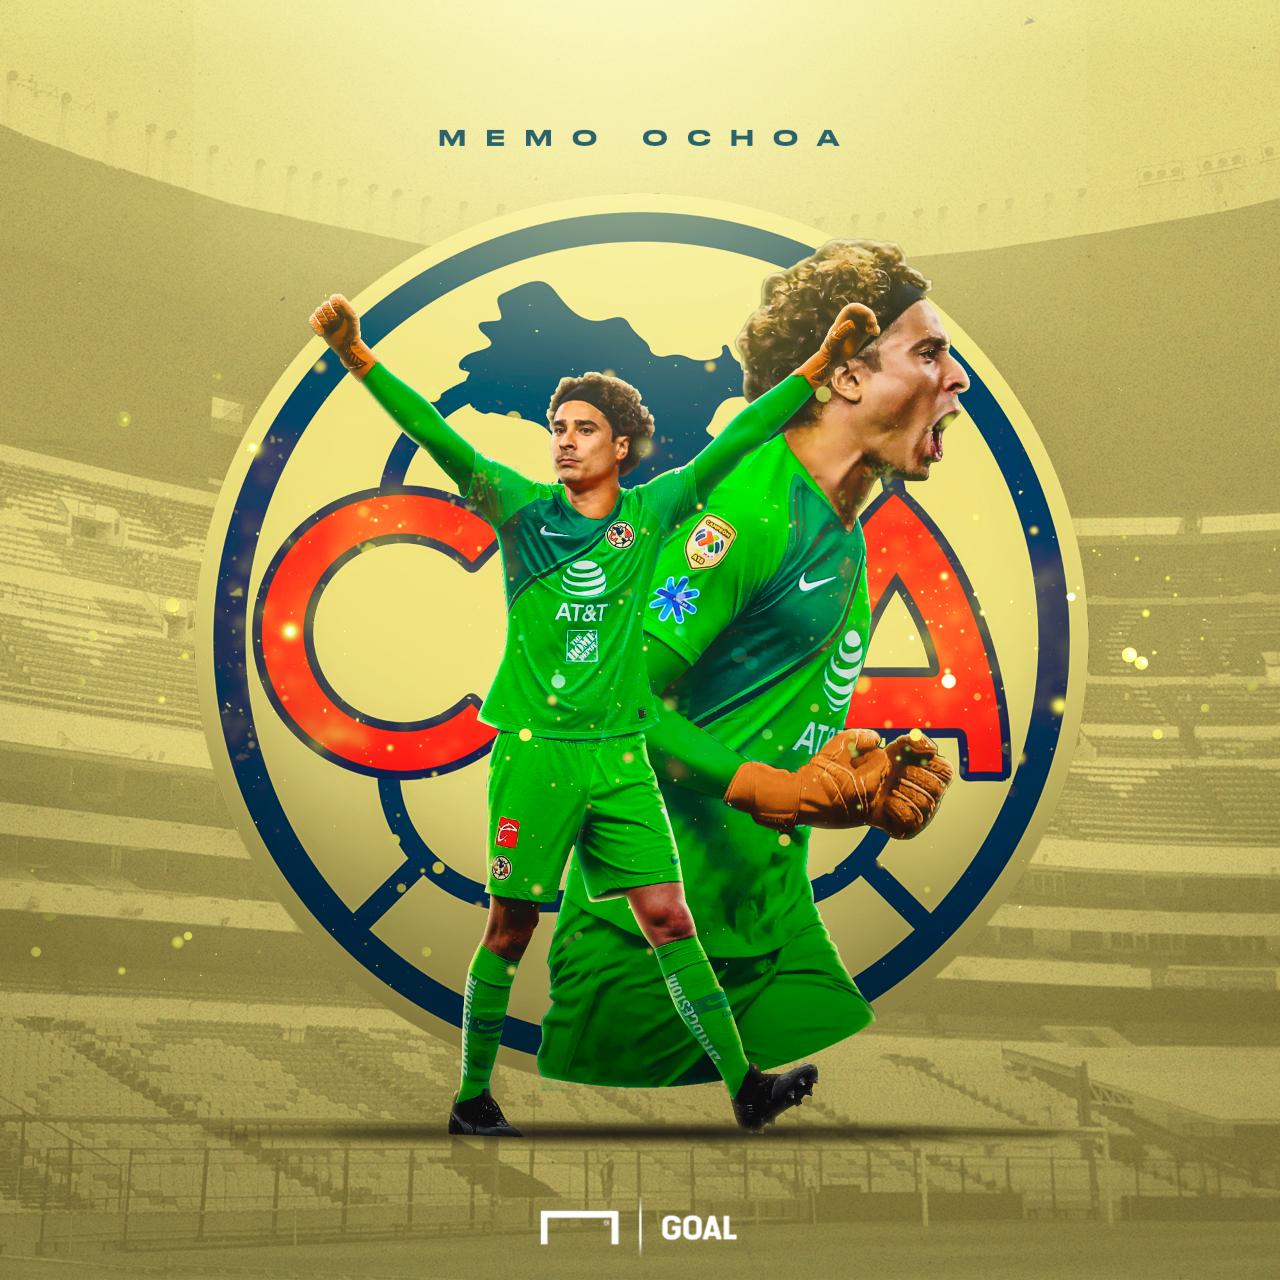 Goal on guillermo ochoa has now officially returned to club america ð httpstcobhlrlwikzf